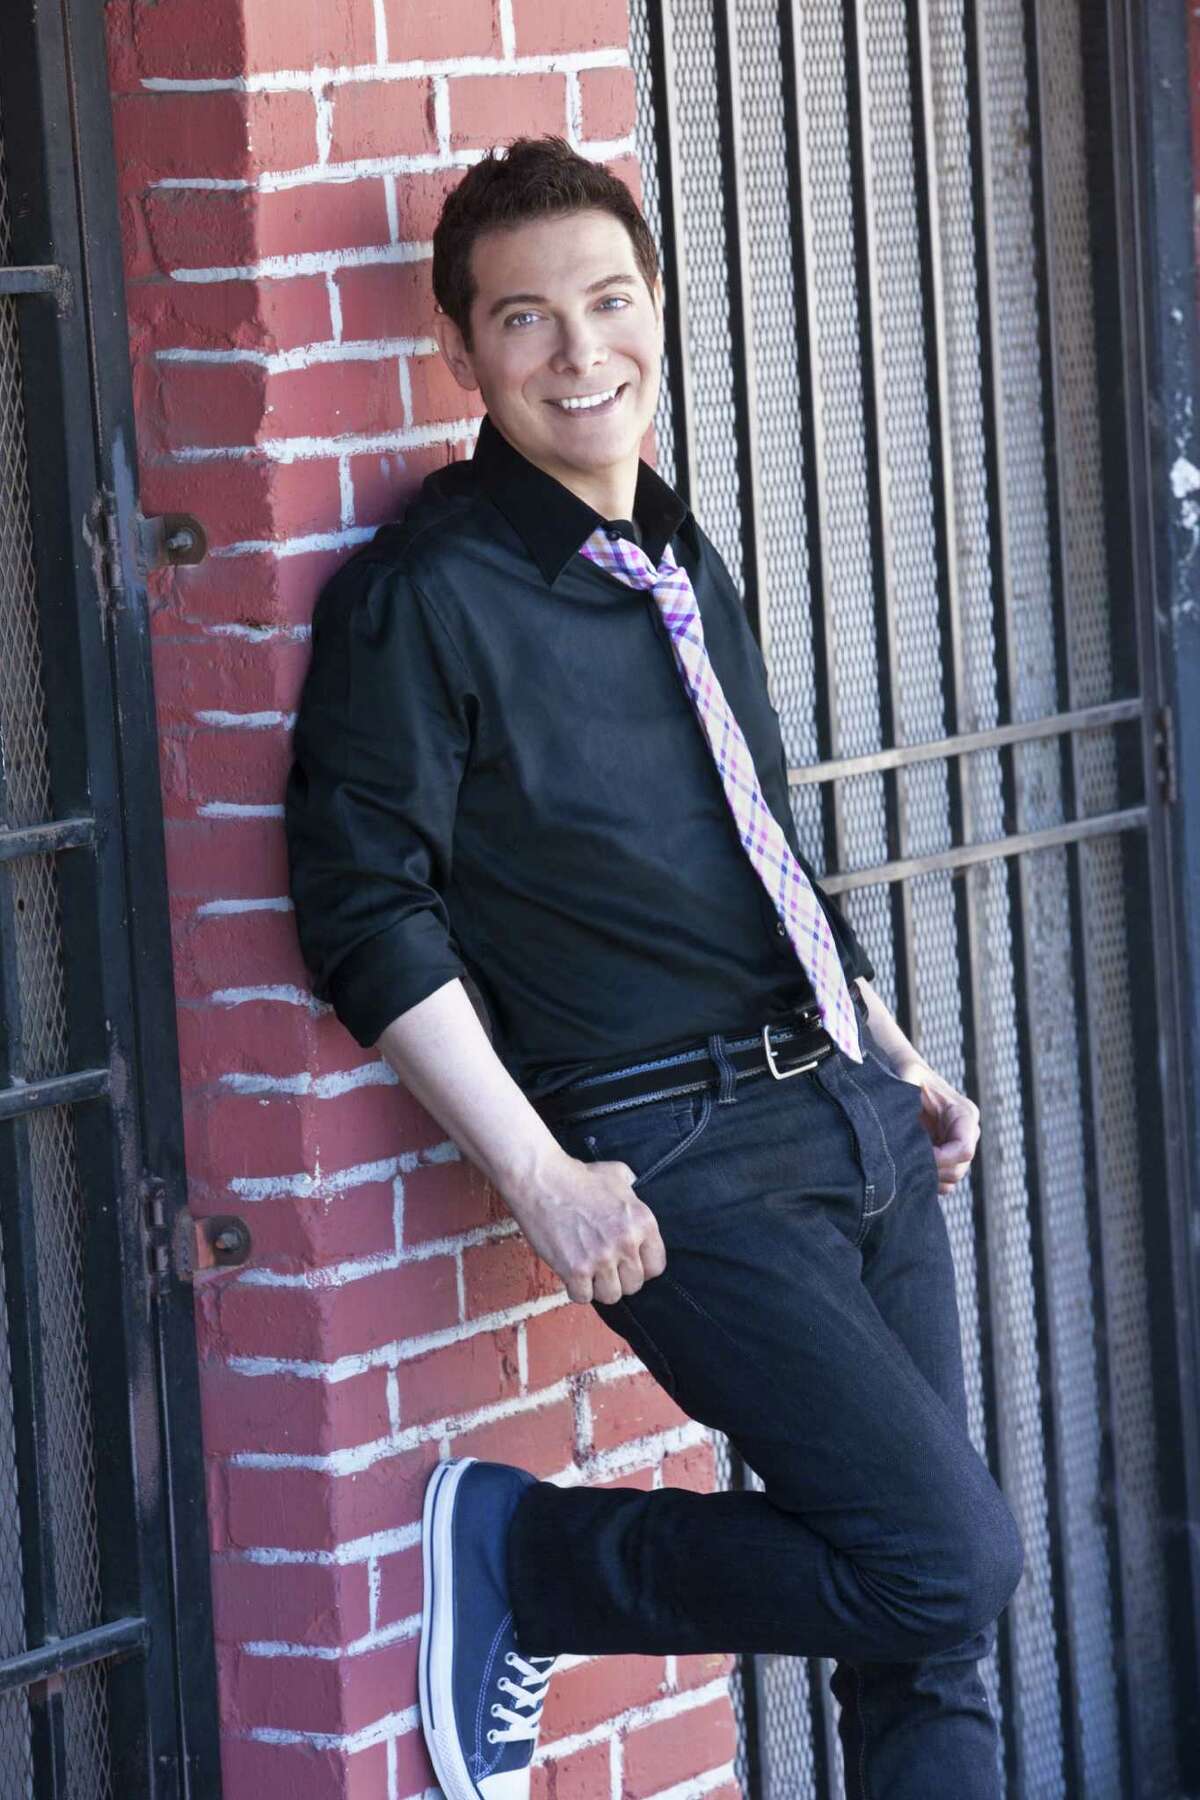 Michael Feinstein's Sunday appearance is free with limited seating. Preference will be given to series pass holders.